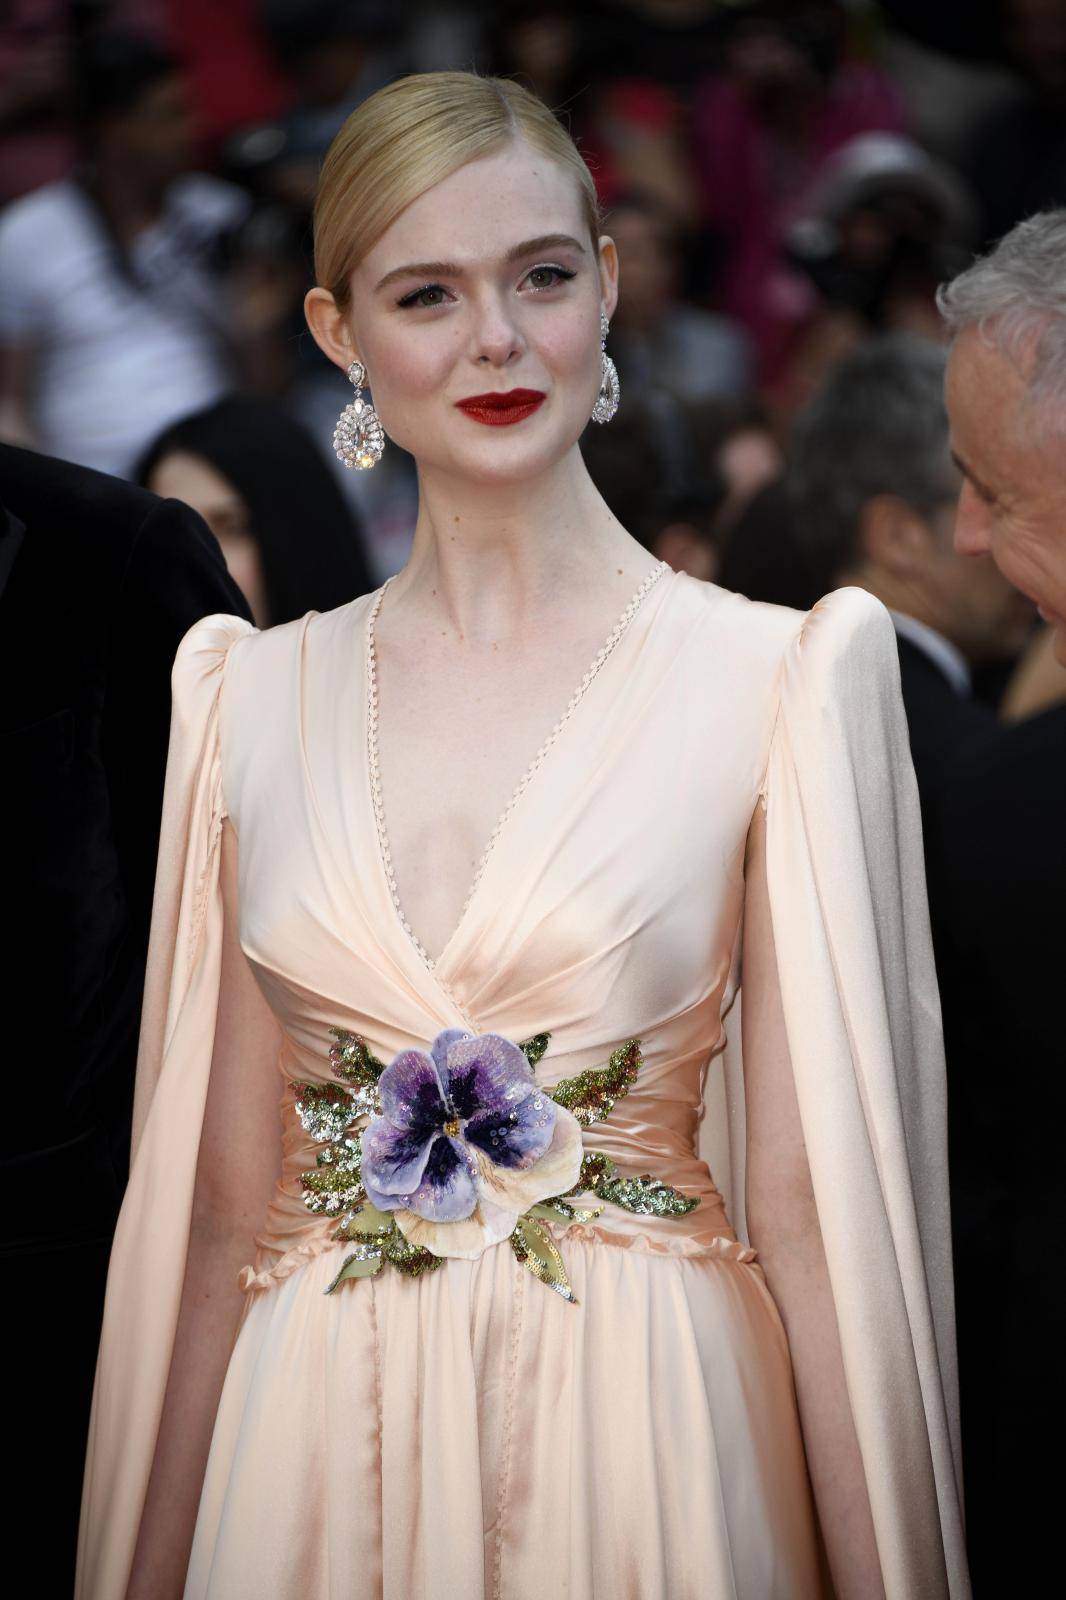 72nd Cannes Film Festival 2019, Red Carpet Opening Ceremony and "The dead don't  die".